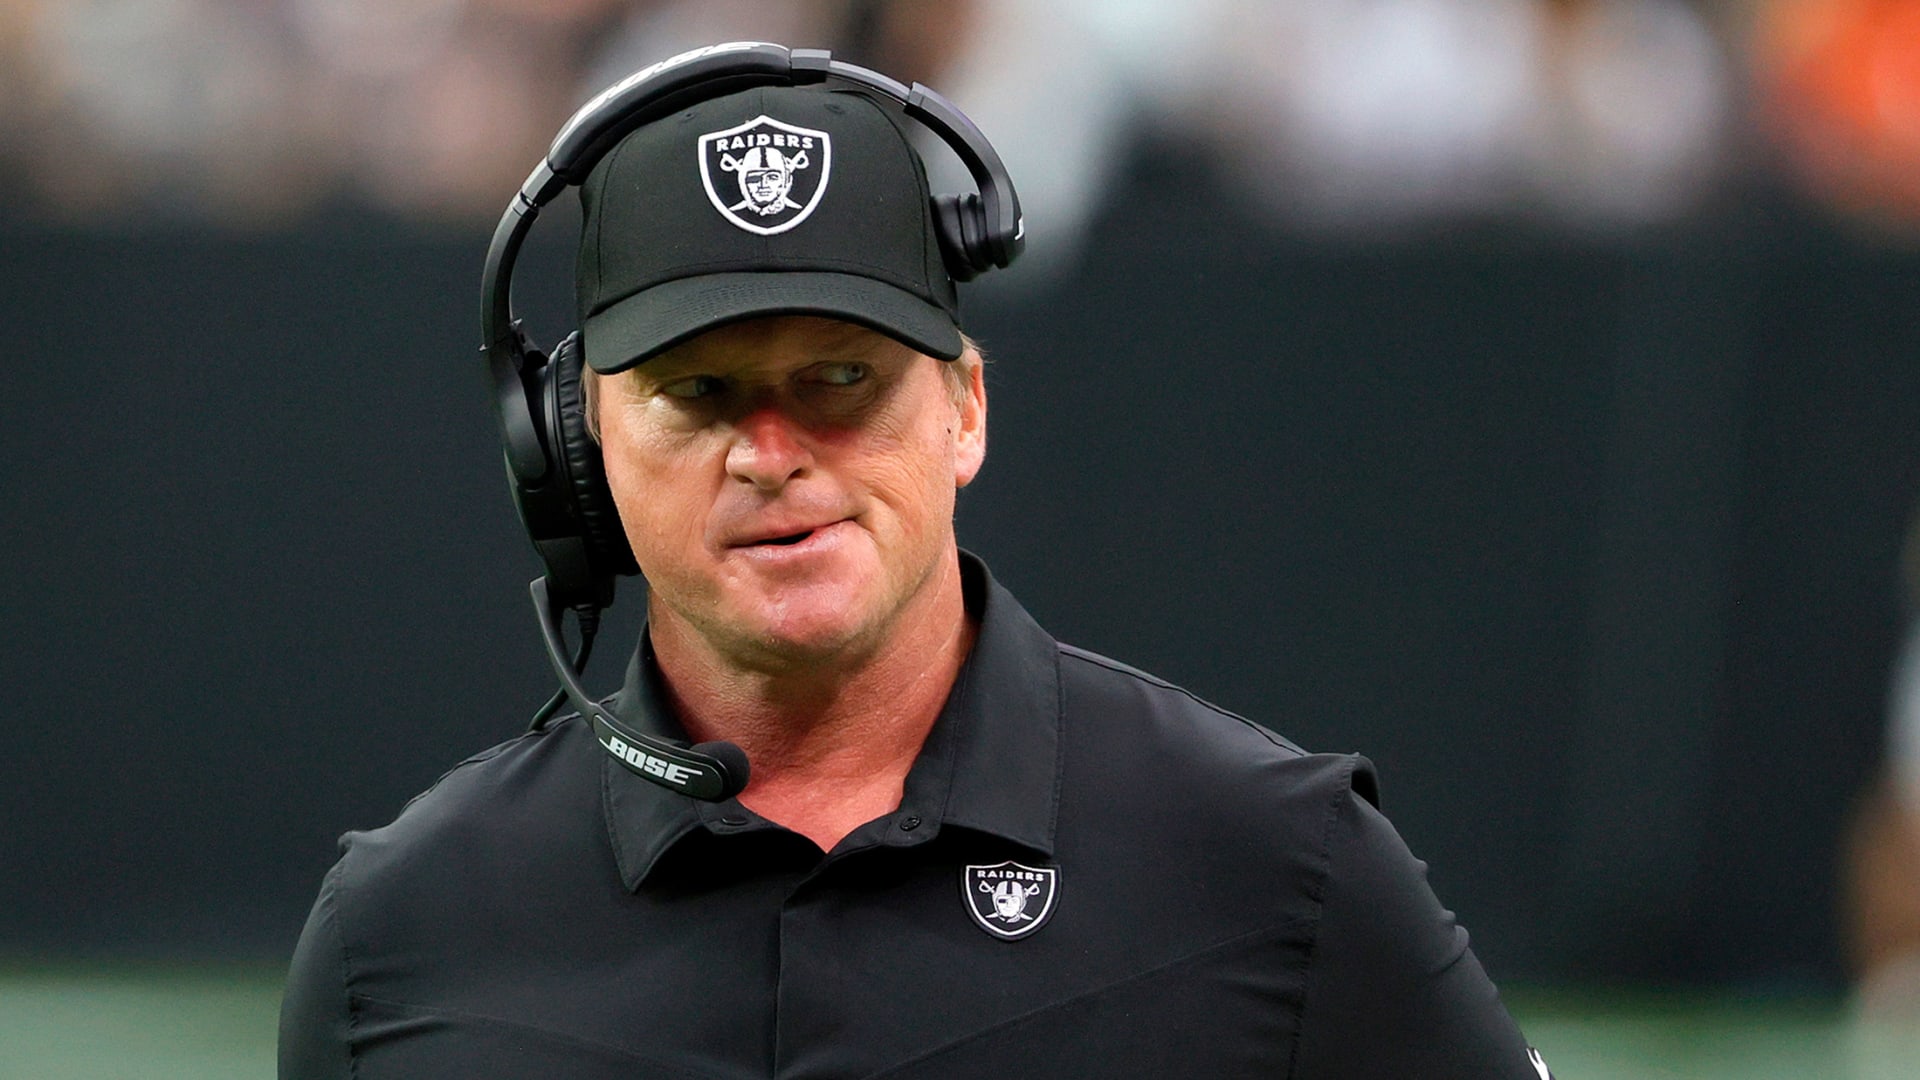 What Every Business Leader Should Learn From the NFL and Jon Gruden Email Controversy